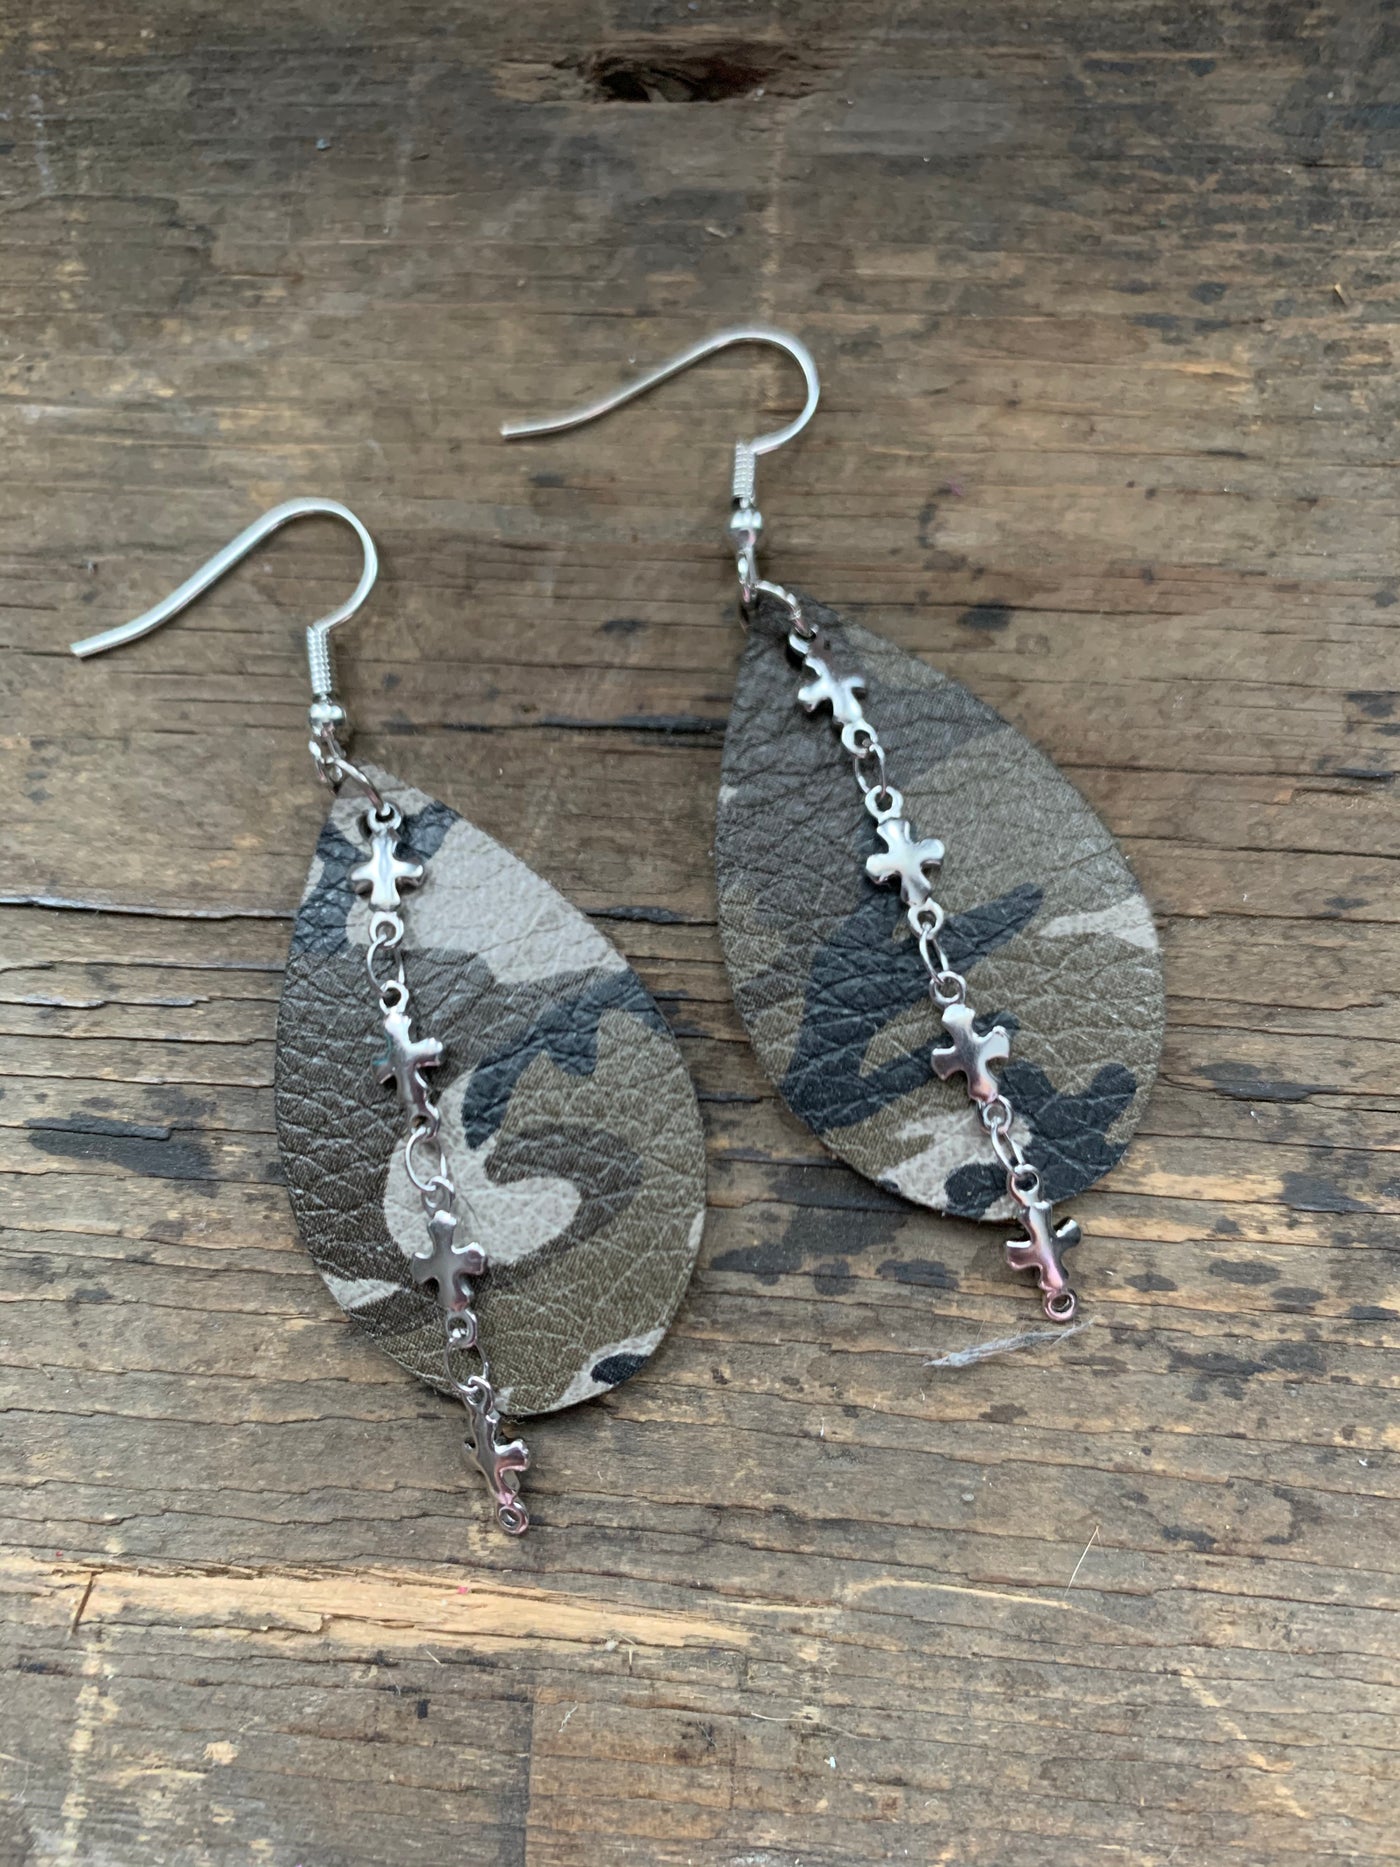 Camo Leather Earrings with Silver Cross Chain - Jill's Jewels | Unique, Handcrafted, Trendy, And Fun Jewelry